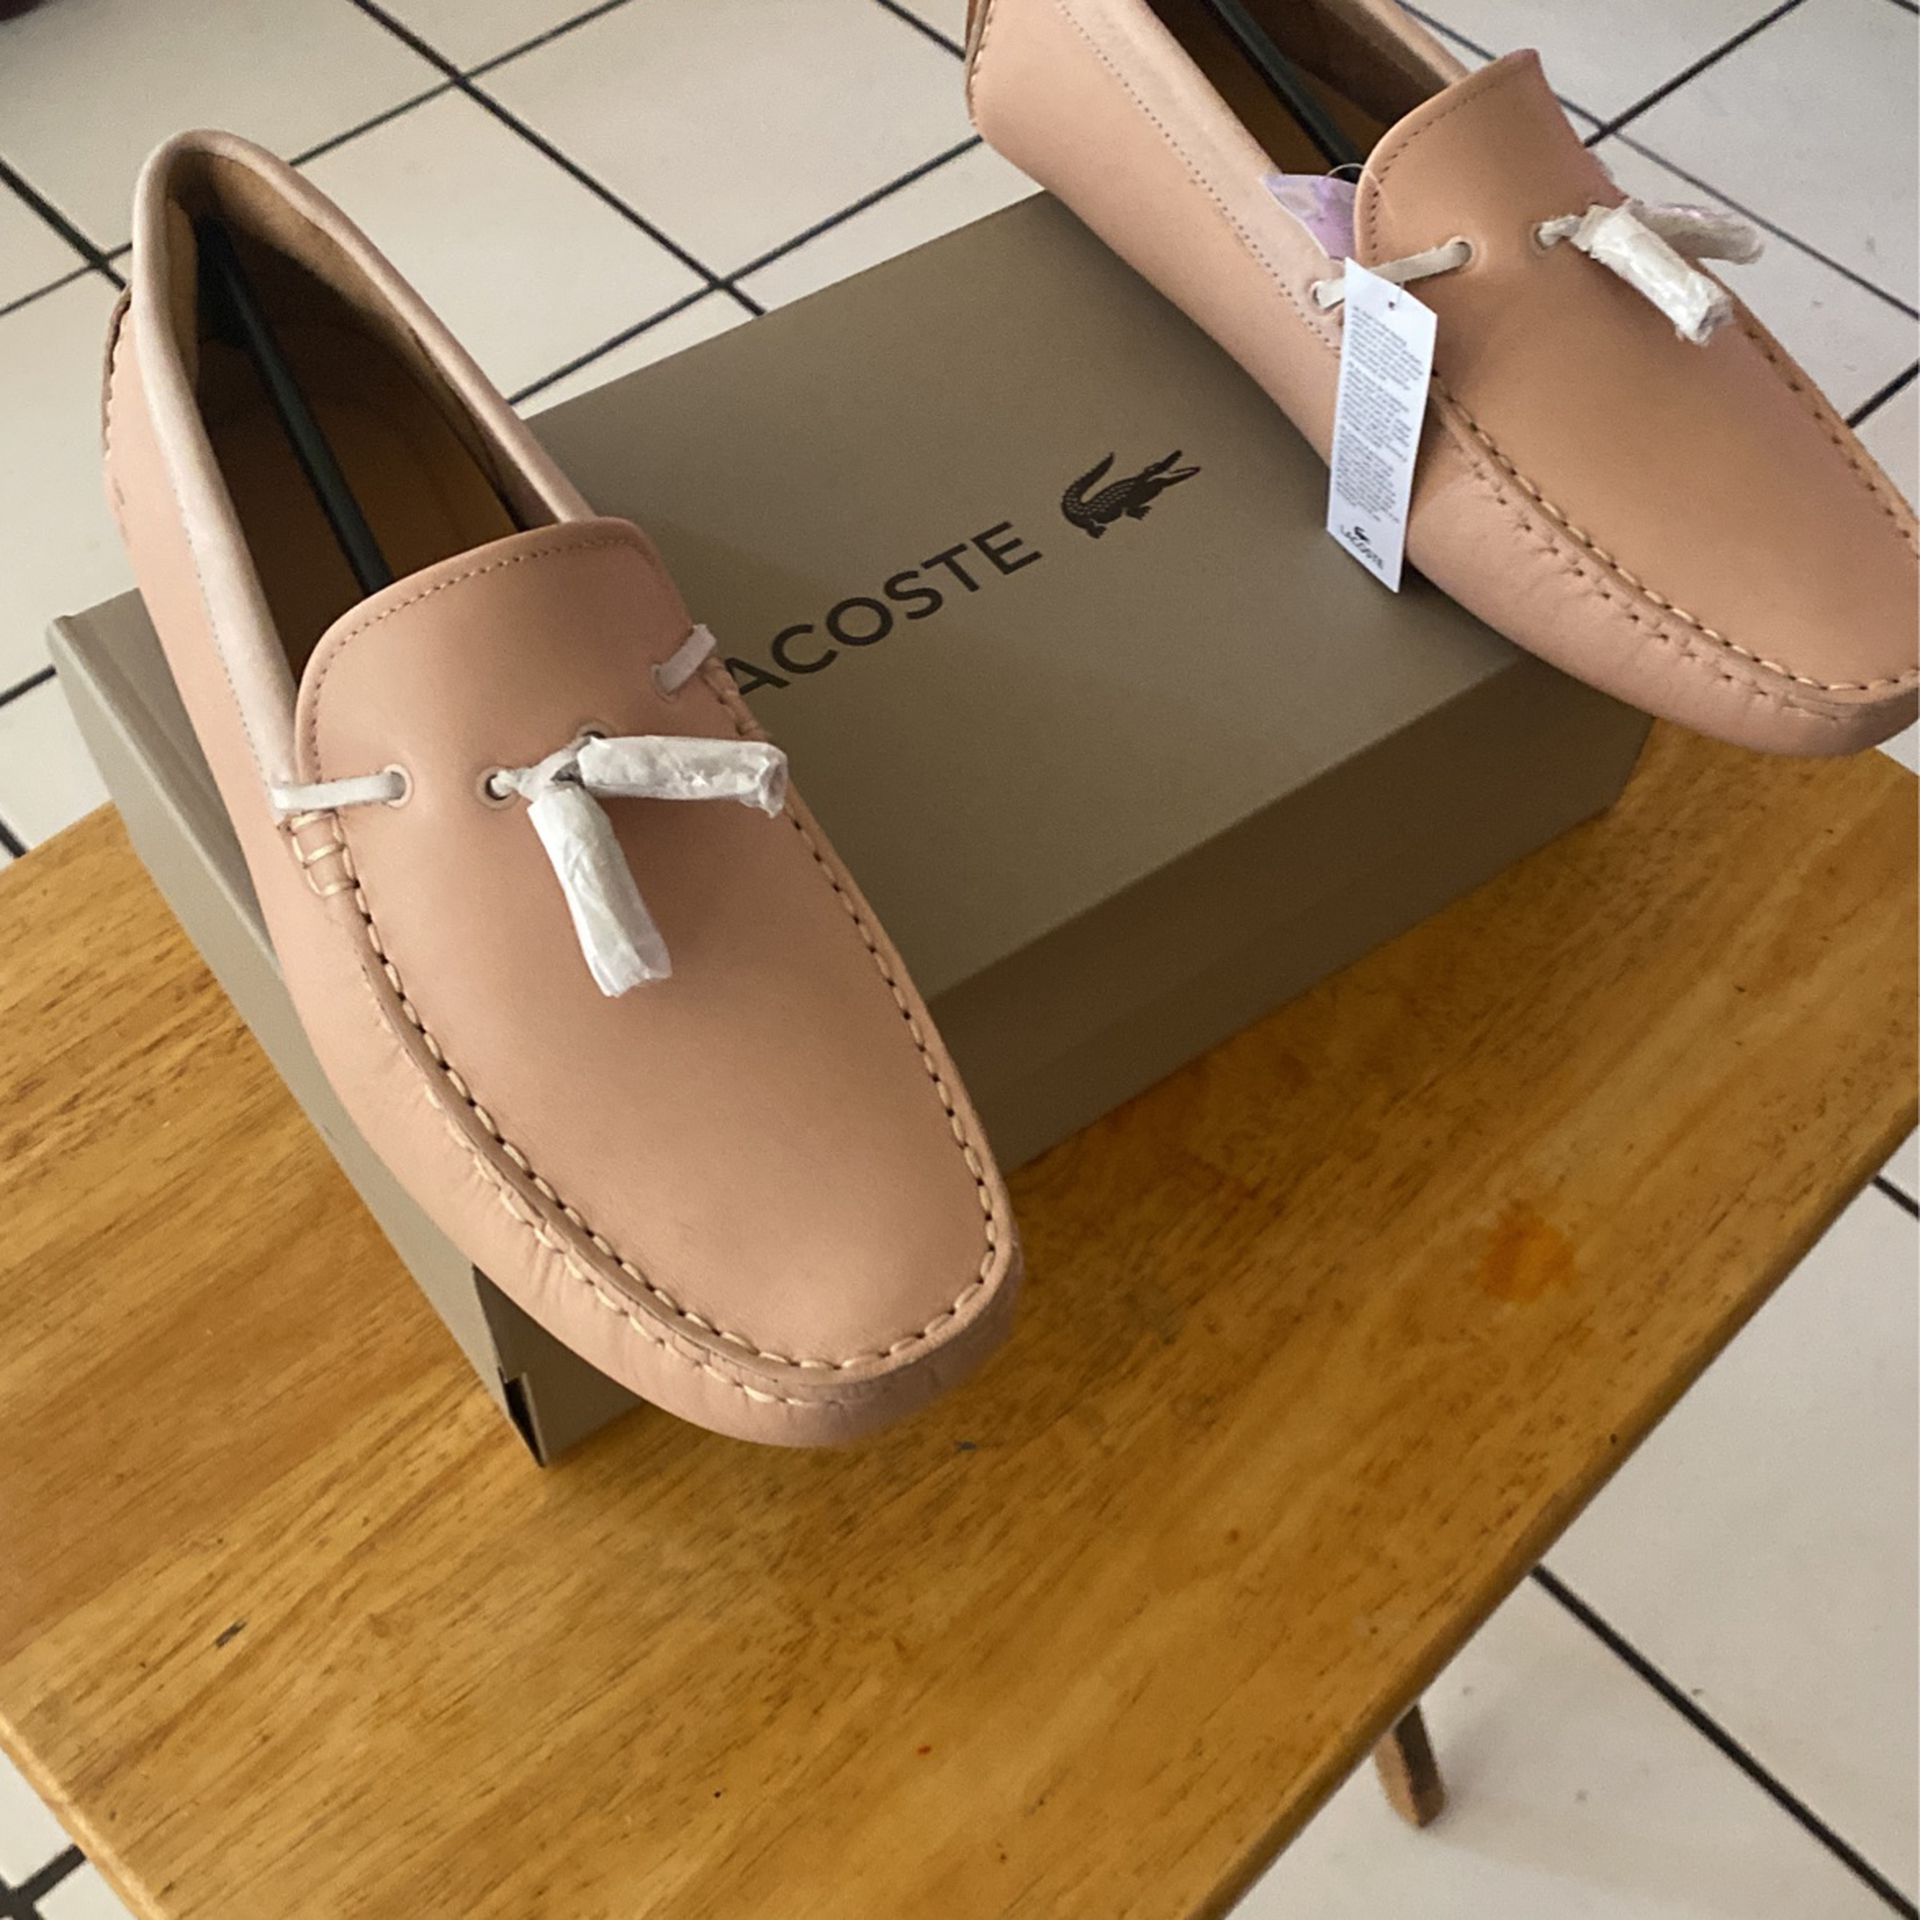 Lacoste Loafers Shoes Size 7.5 Mens Peach New Ones Whit Tag for Sale in Bell Gardens, CA - OfferUp